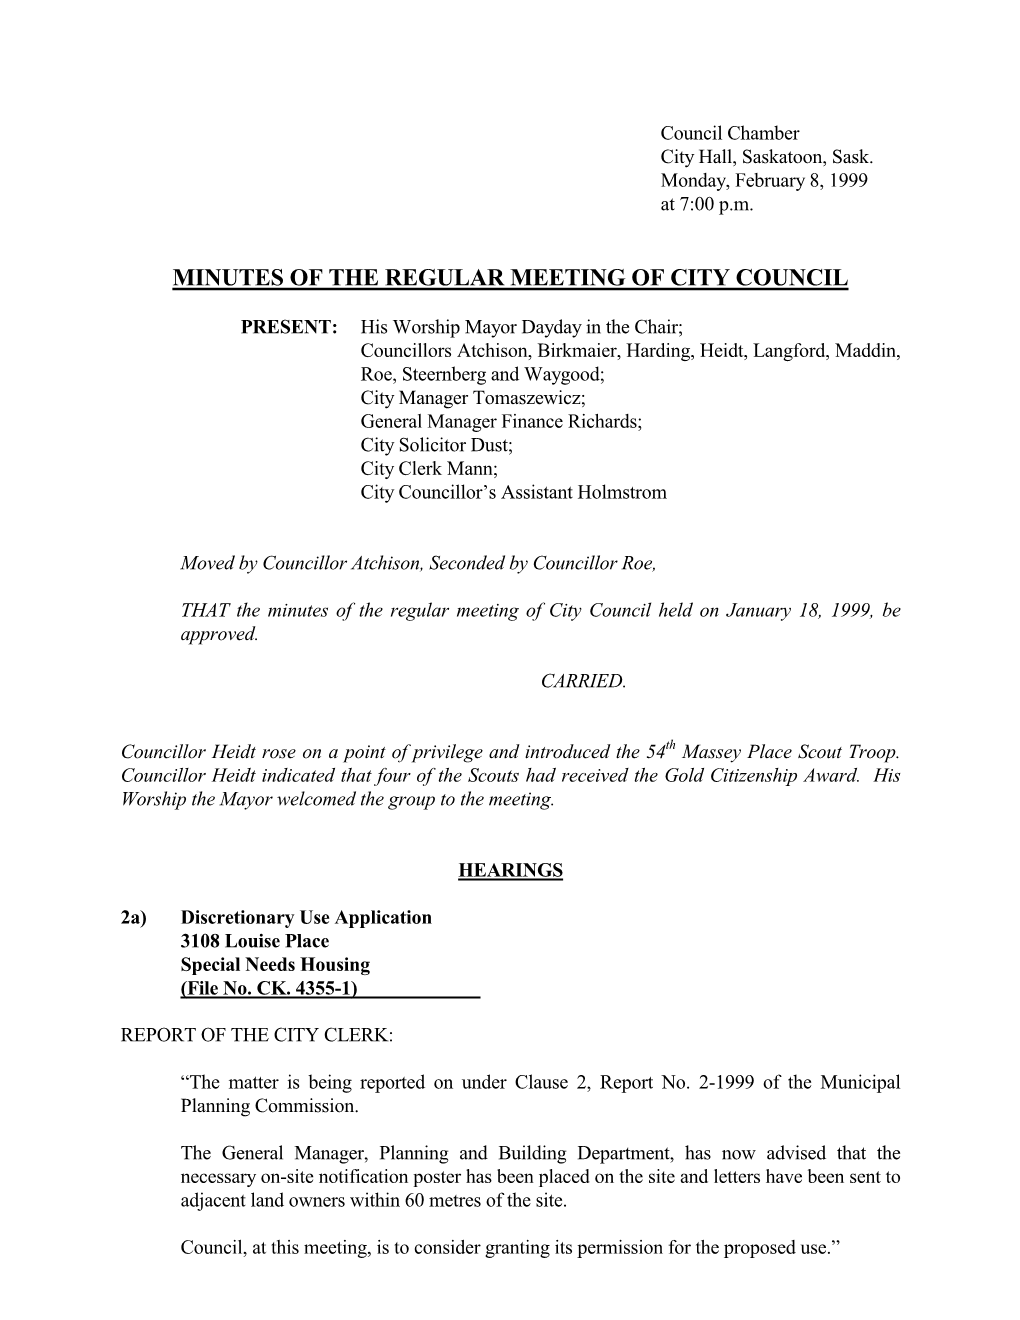 Minutes of the Regular Meeting of City Council